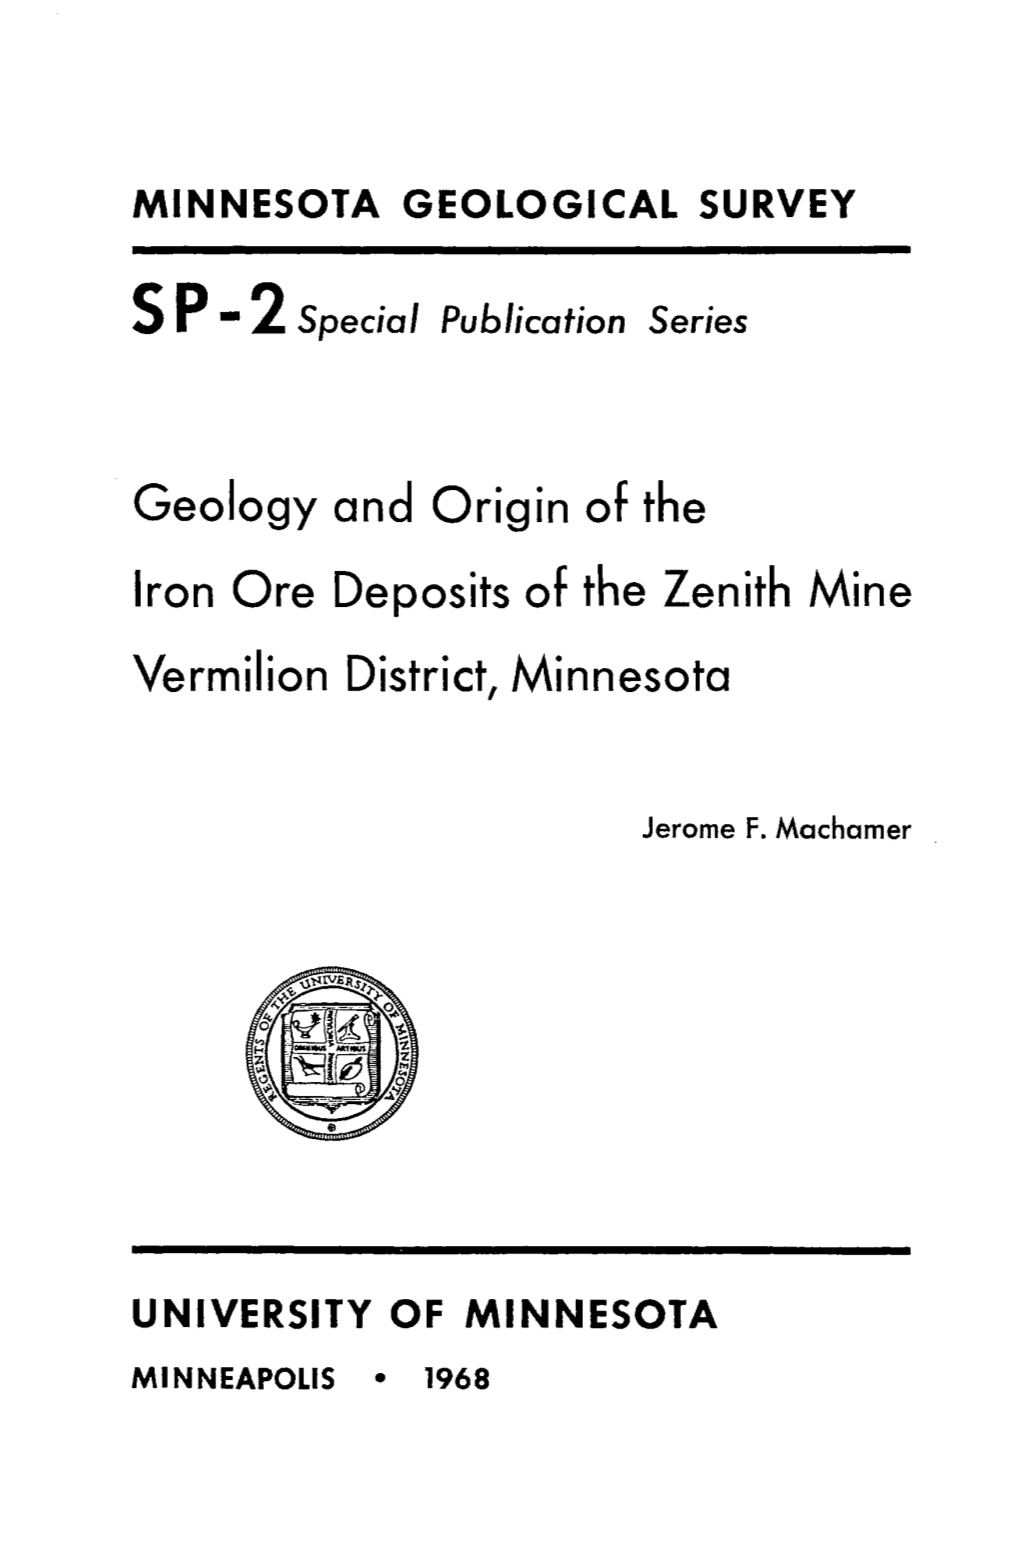 Geology and Origin of the Iron Ore Deposits of the Zenith Mine Vermilion District, Minnesota